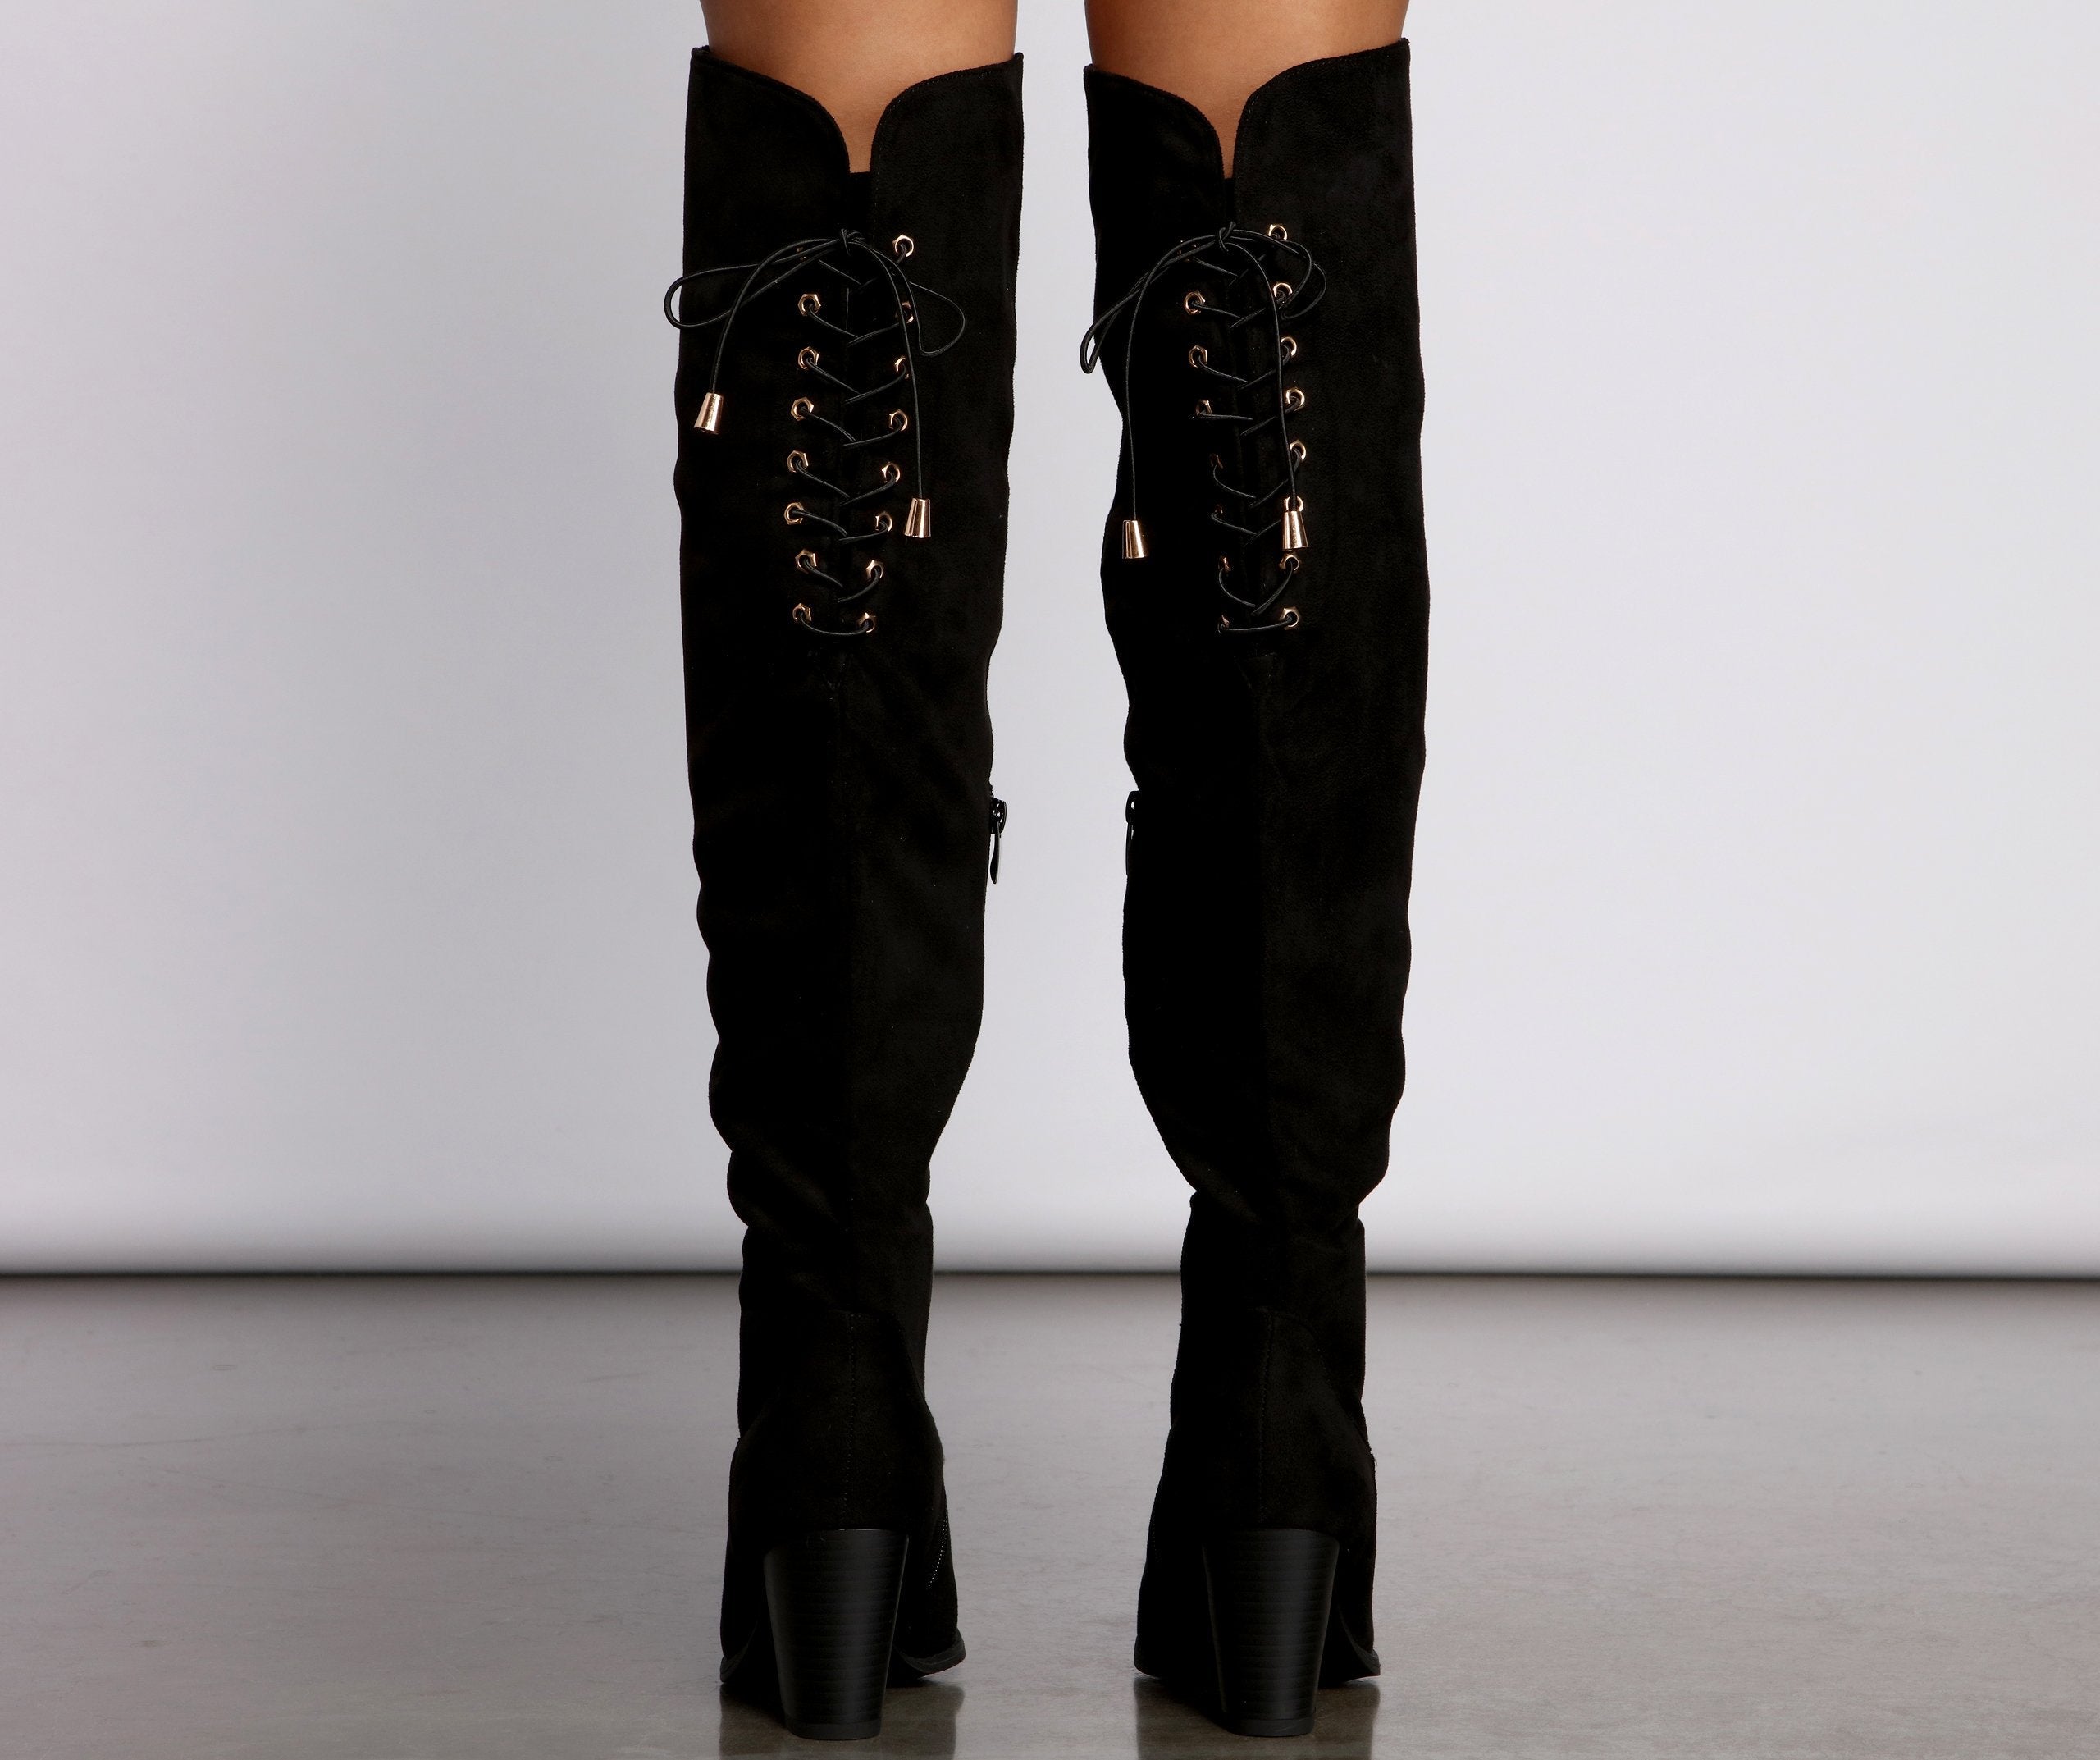 Faux Suede Lace-Up Stacked Heel Boots